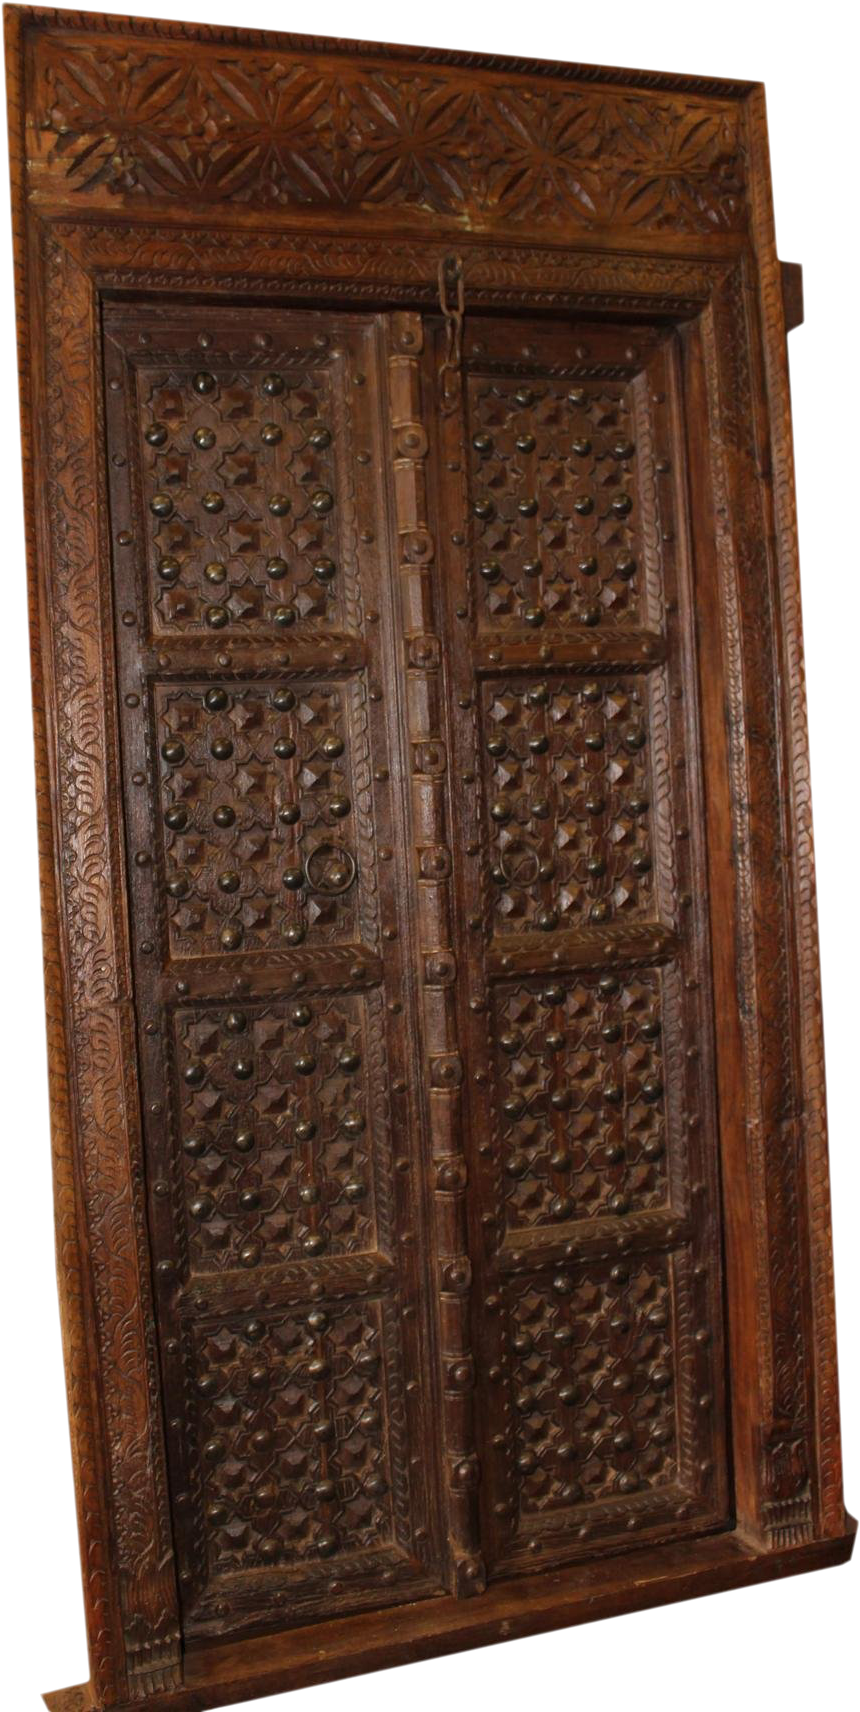 Antique Indian Carved Wooden Door With Metal Fittings